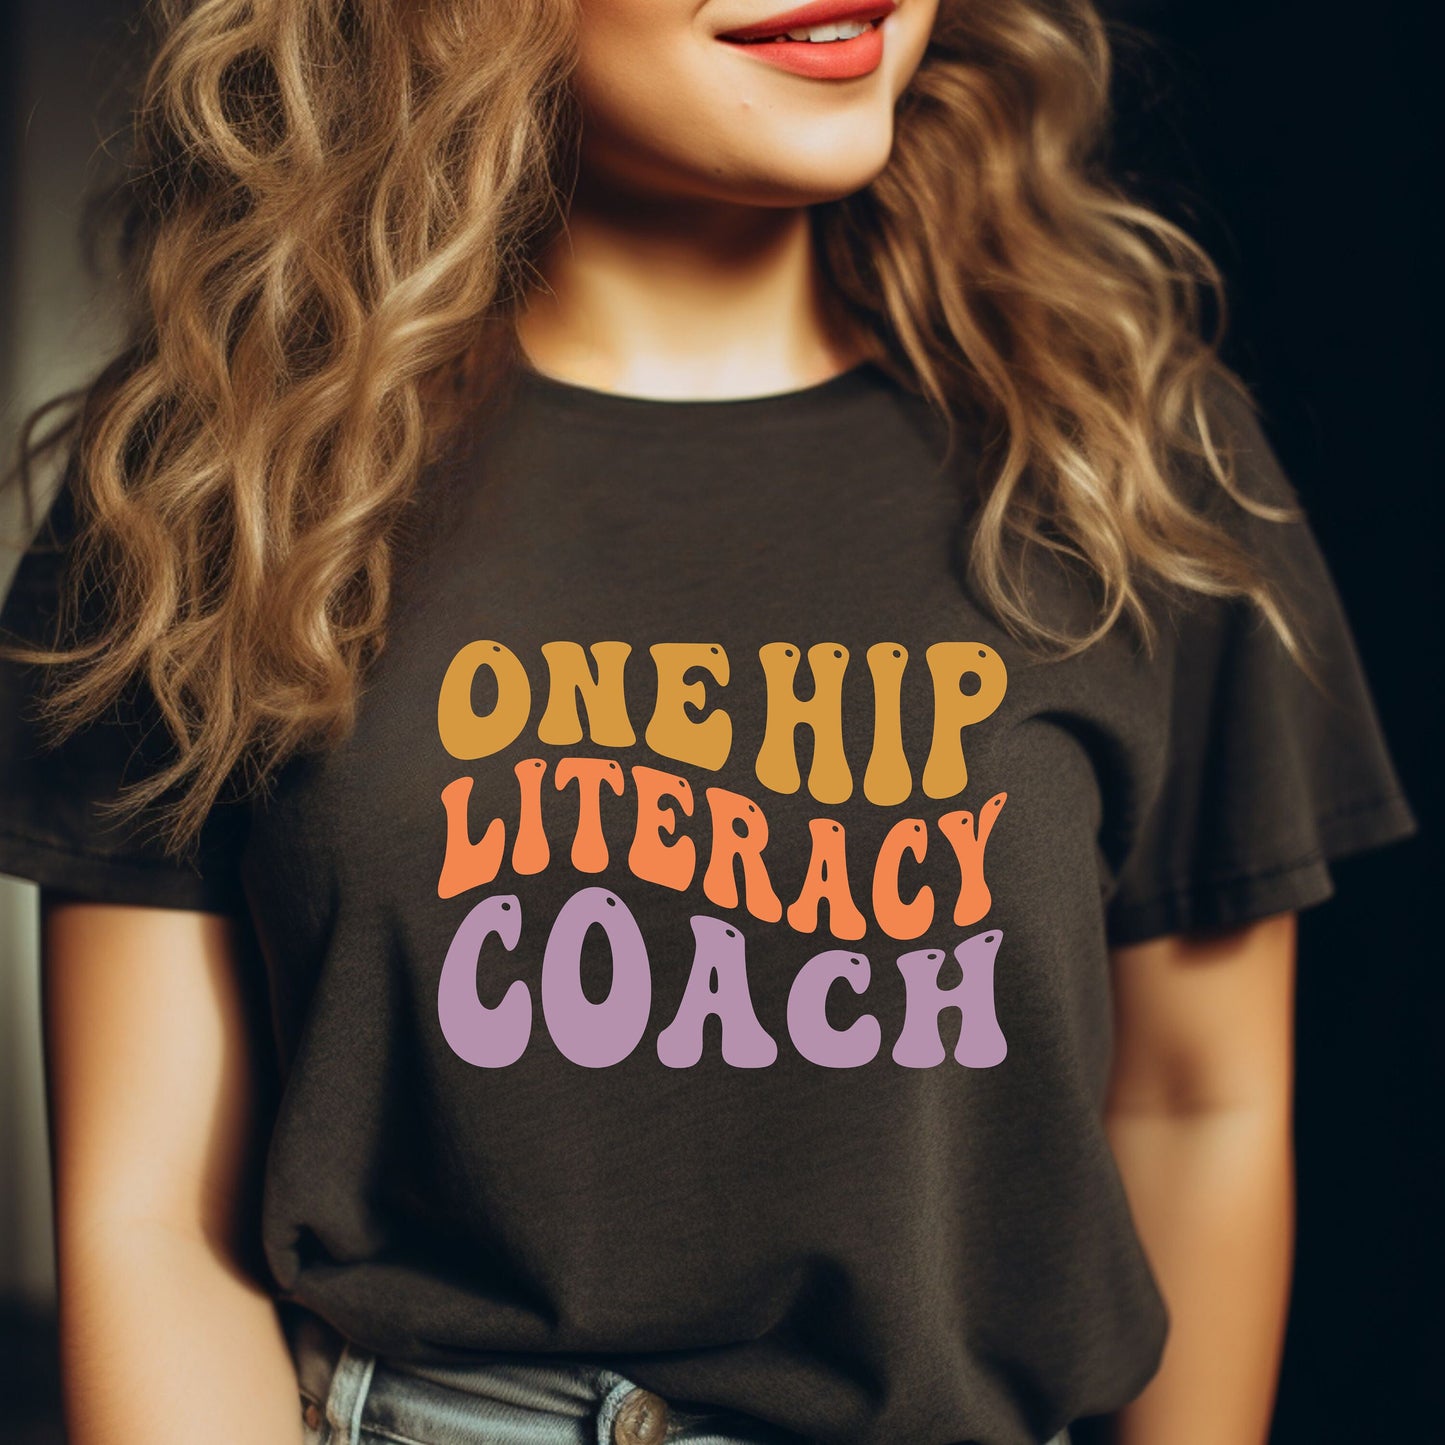 Reading Teacher Shirts: Perfect Librarian Gift for Book Lovers and Literacy Enthusiasts